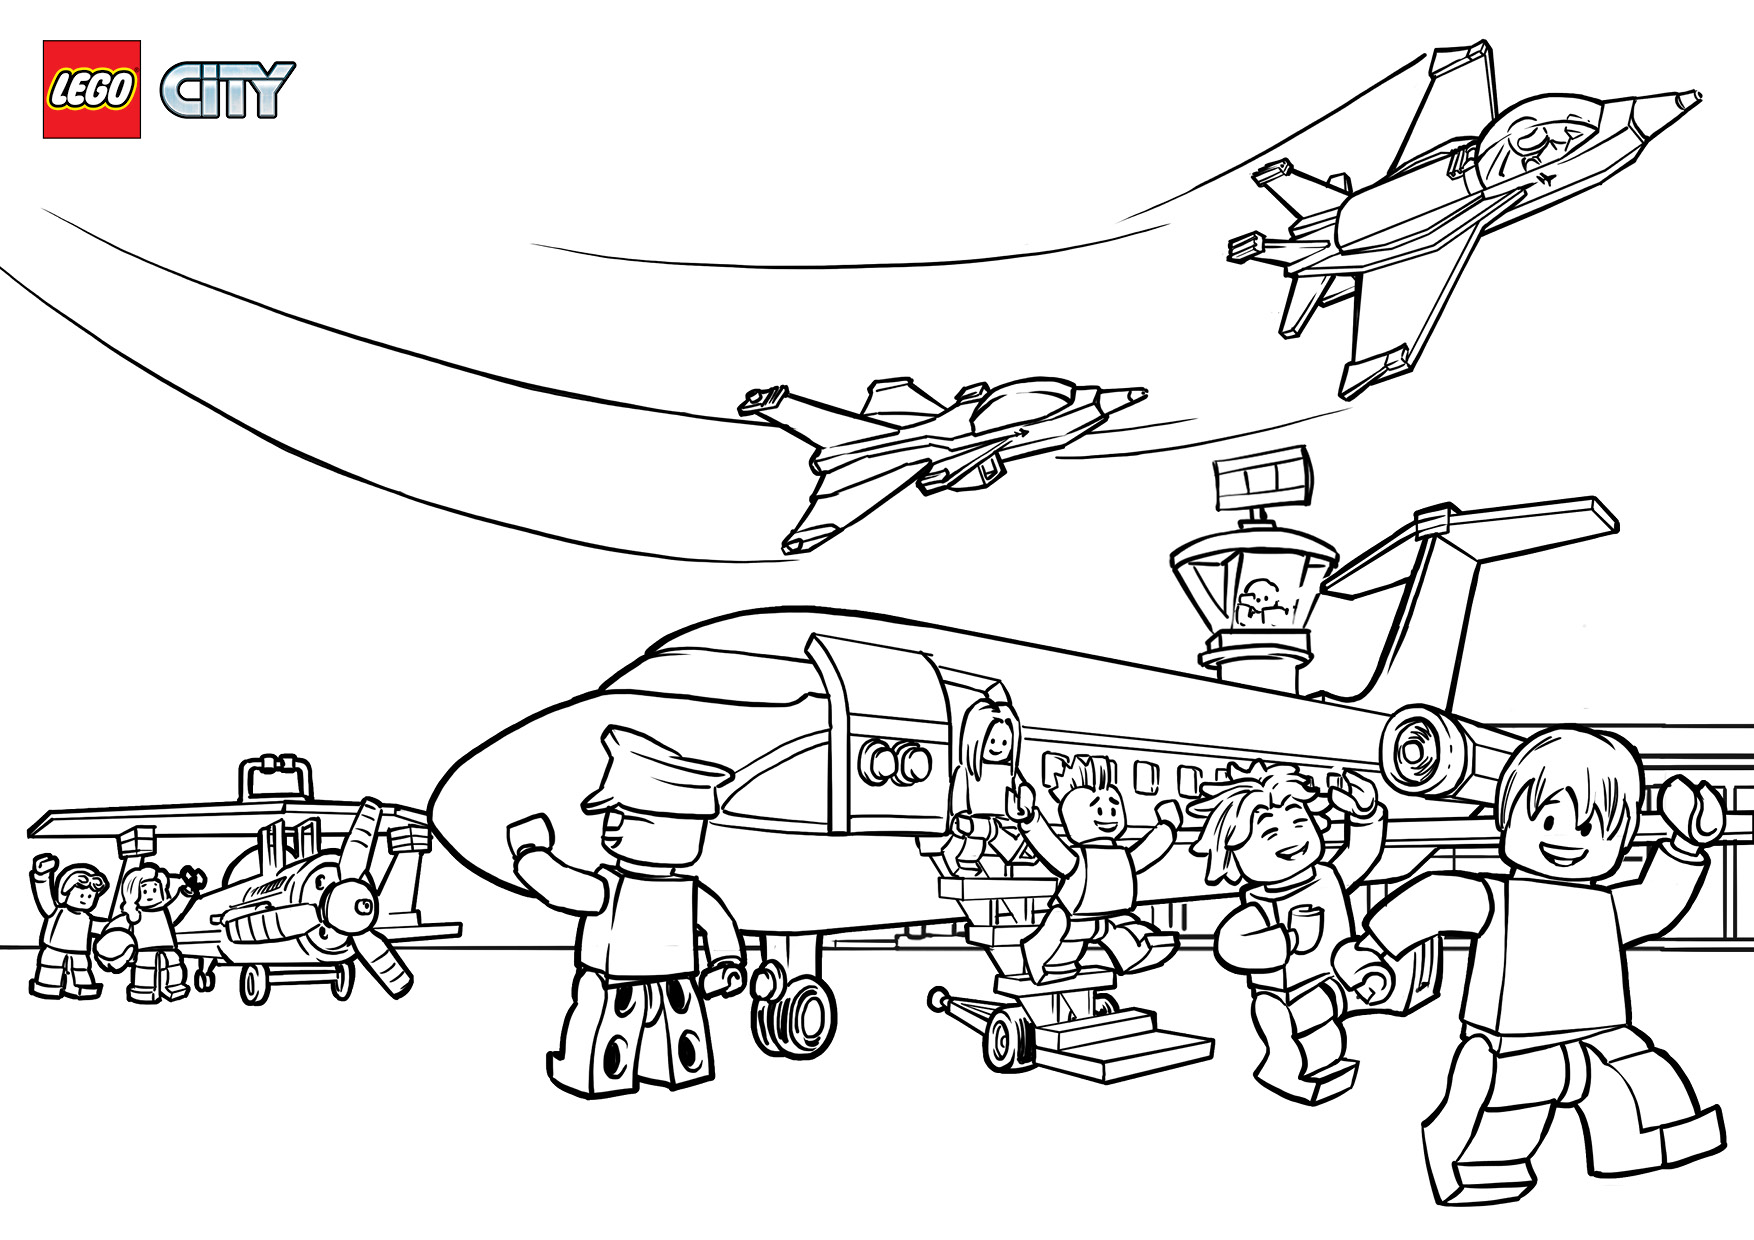 The best free Airport coloring page images. Download from 40 free